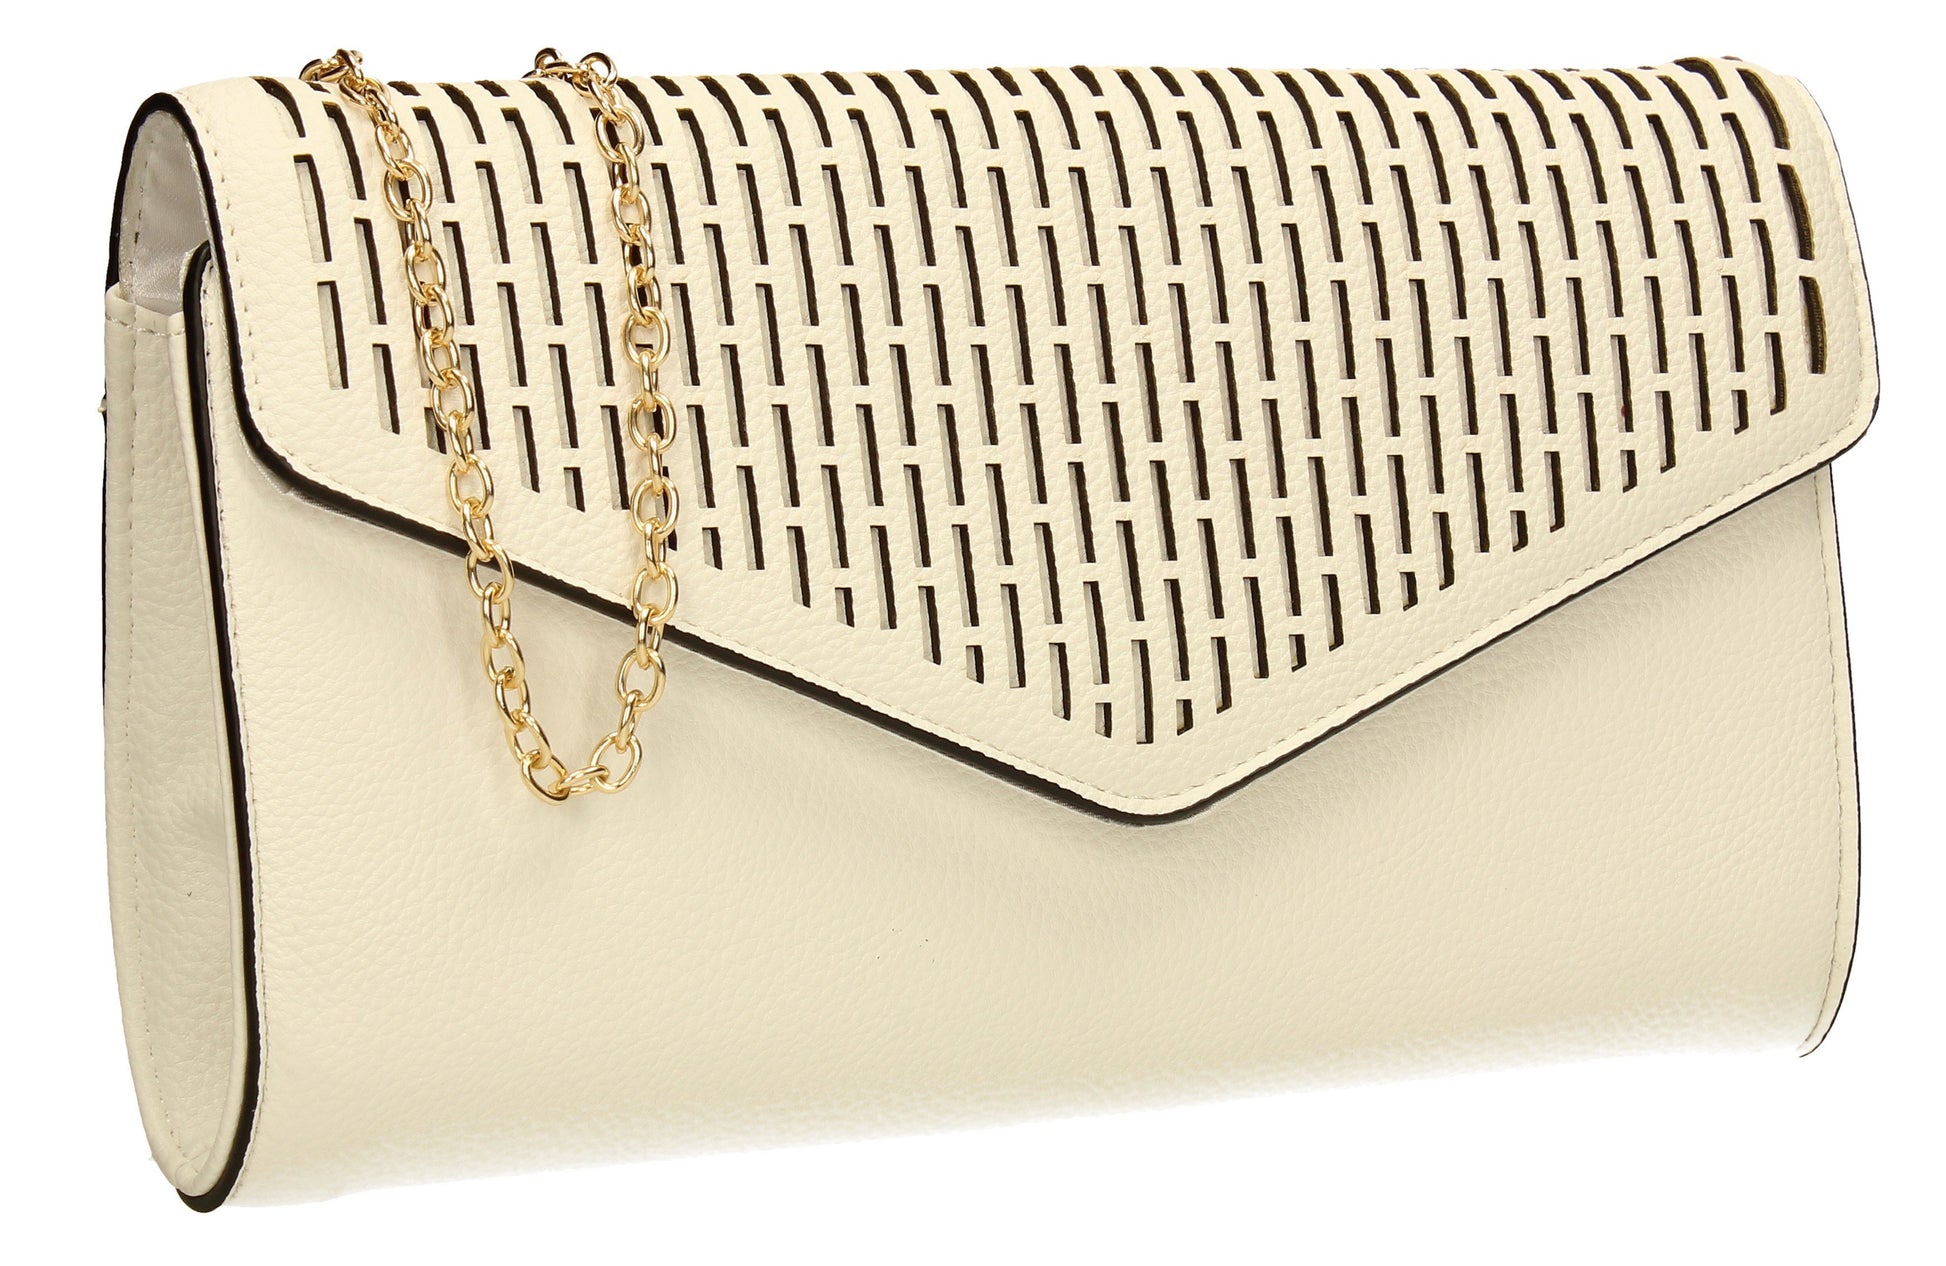 SWANKYSWANS Andrea Clutch Bag White Cute Cheap Clutch Bag For Weddings School and Work